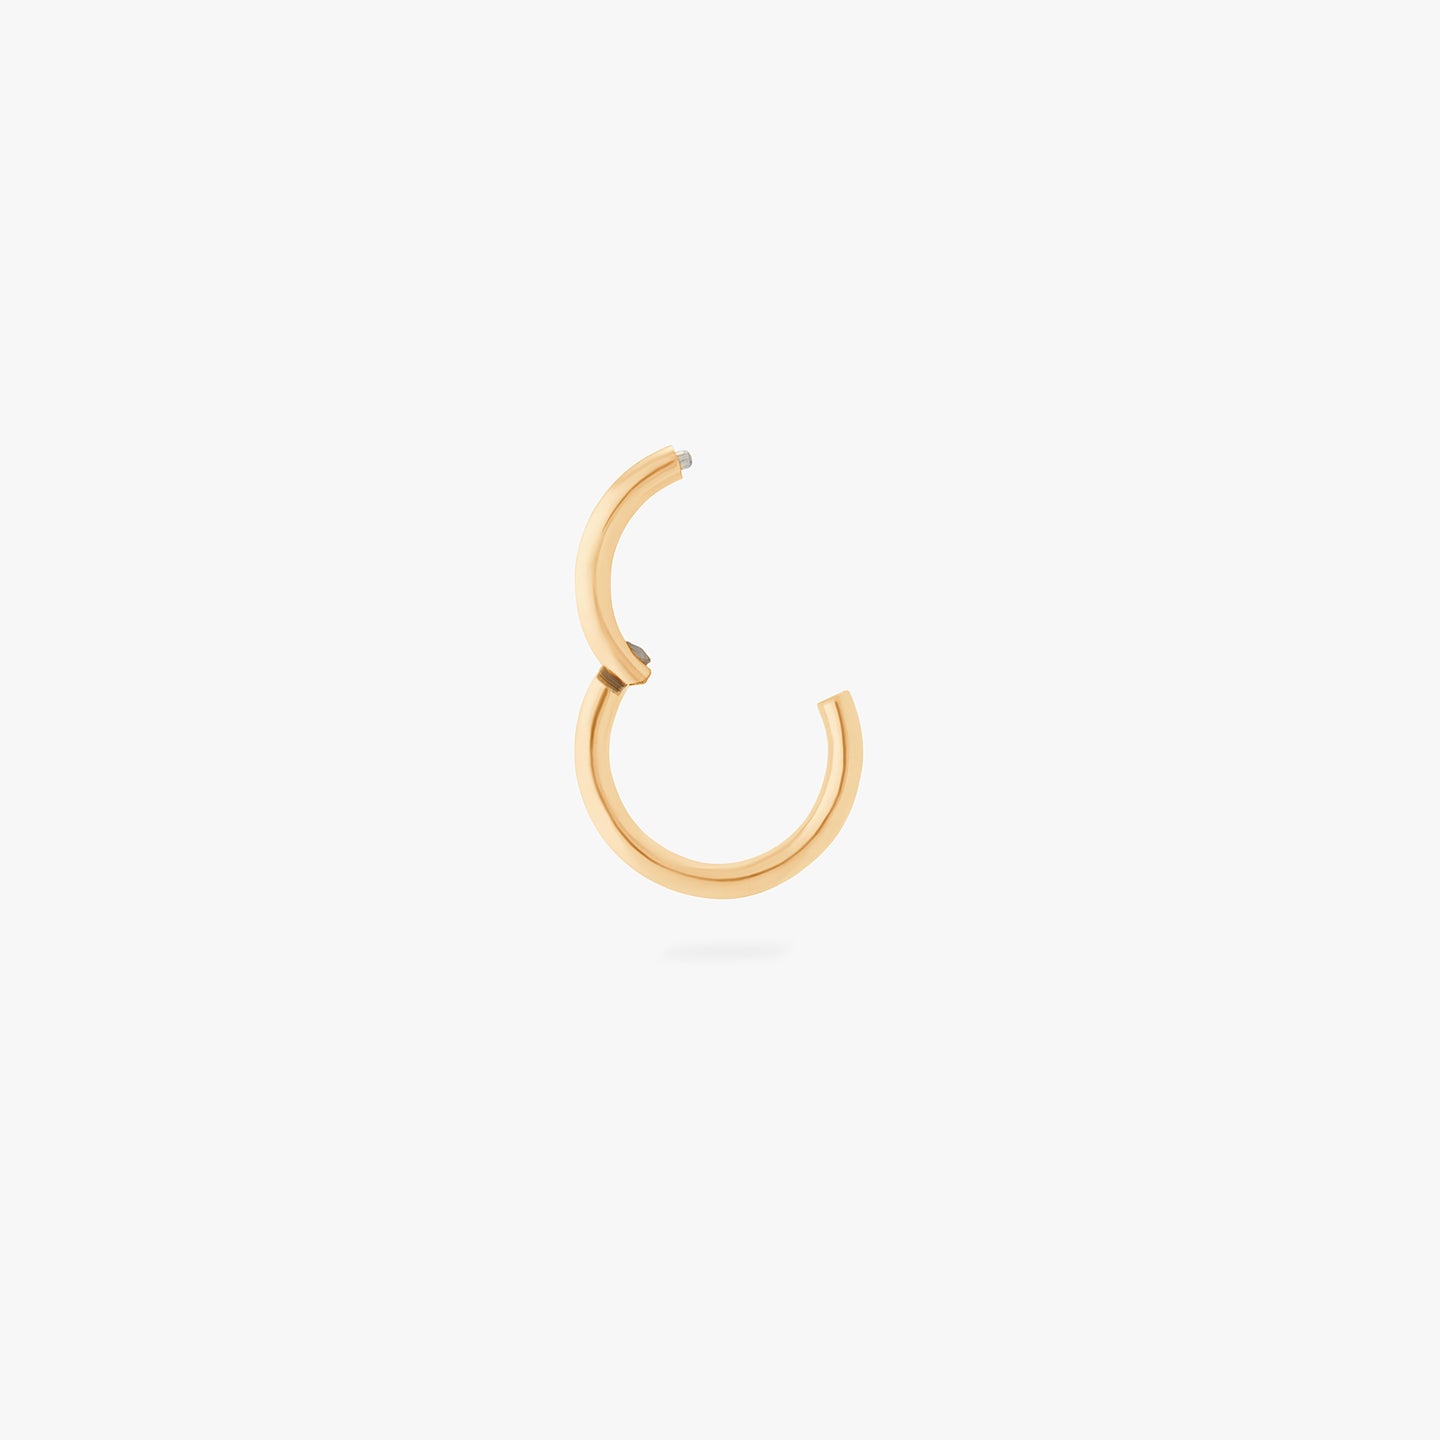 This is an image of a gold clicker with a 6mm inner diameter. color:null|gold